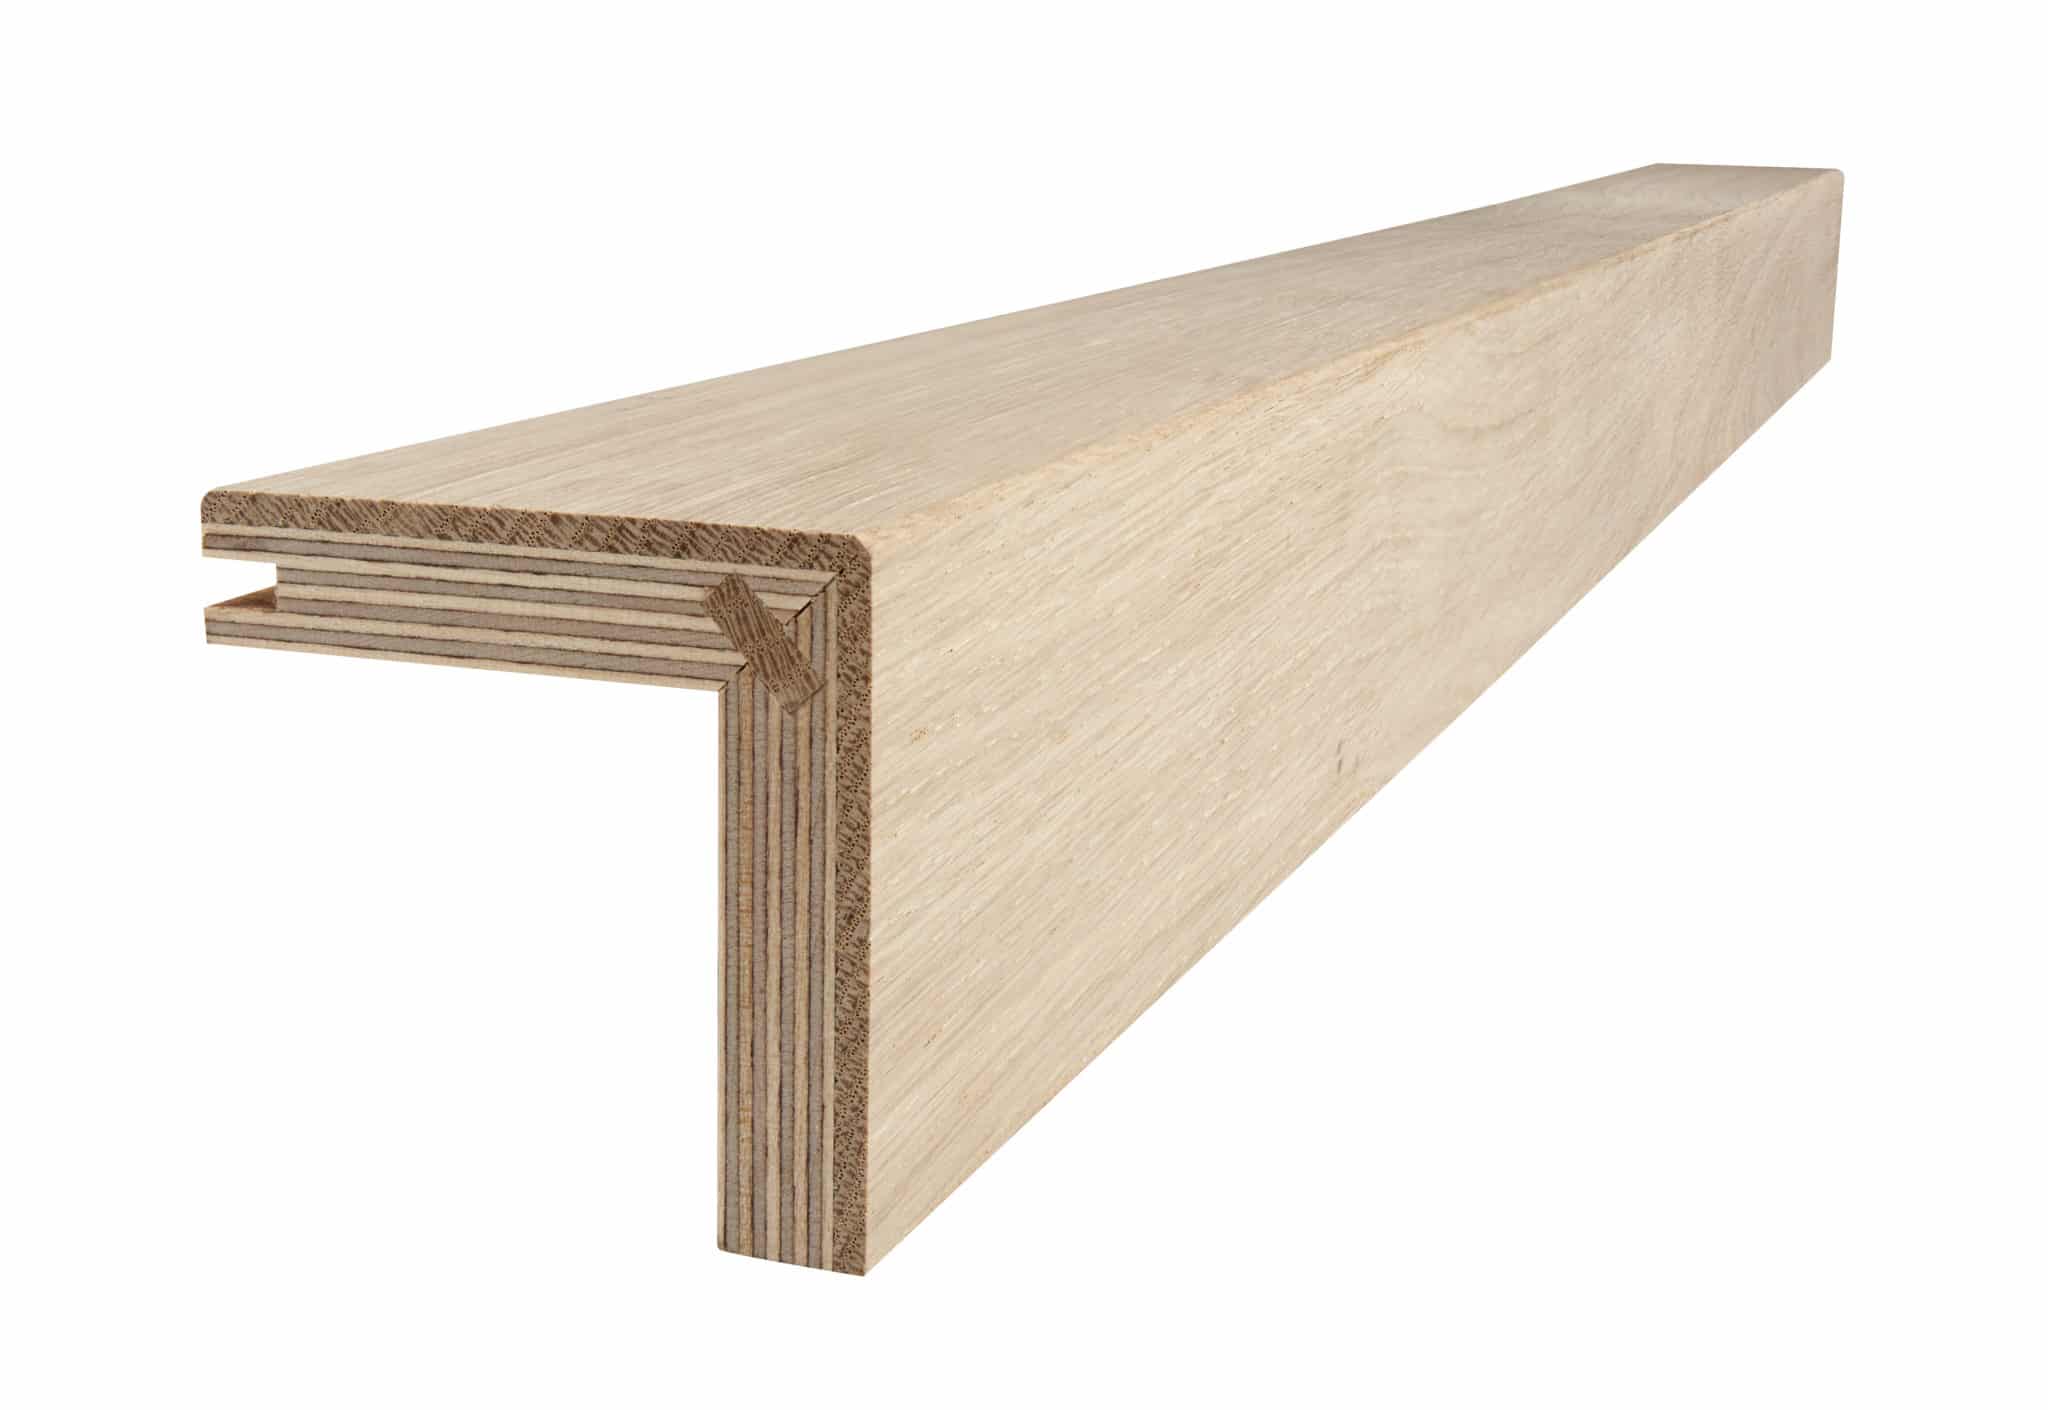 PROFIL stair nose wood stairs